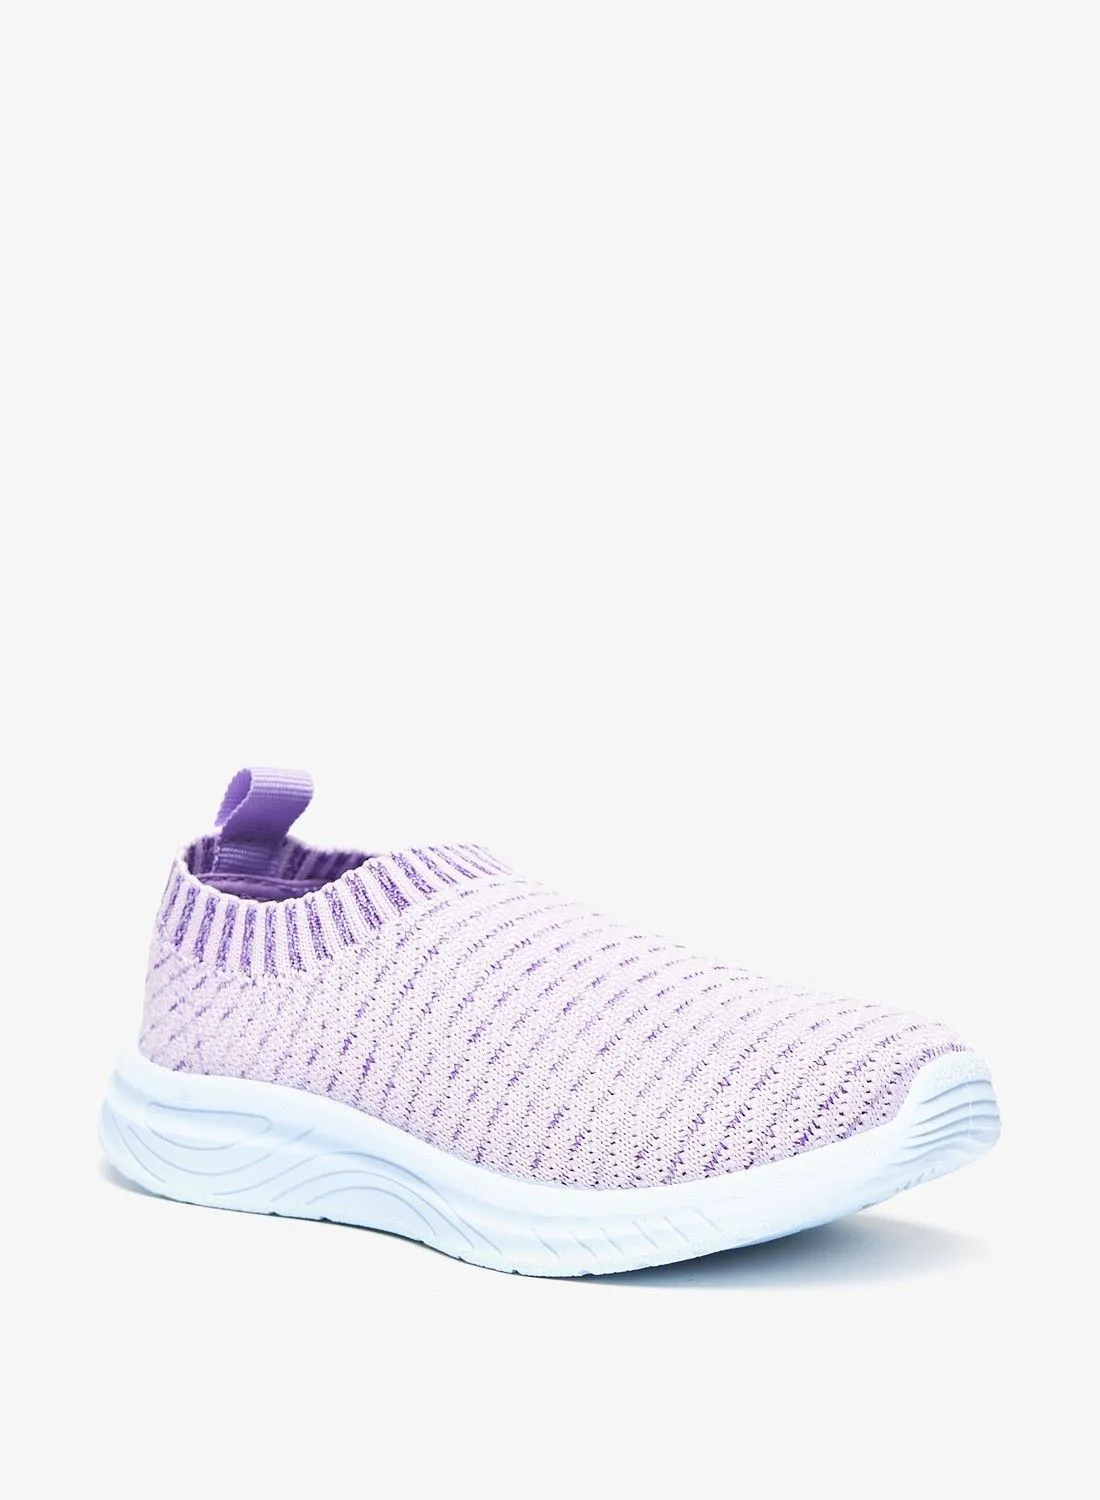 shoexpress Textured Slip On Trainers with Pull Tabs Purple